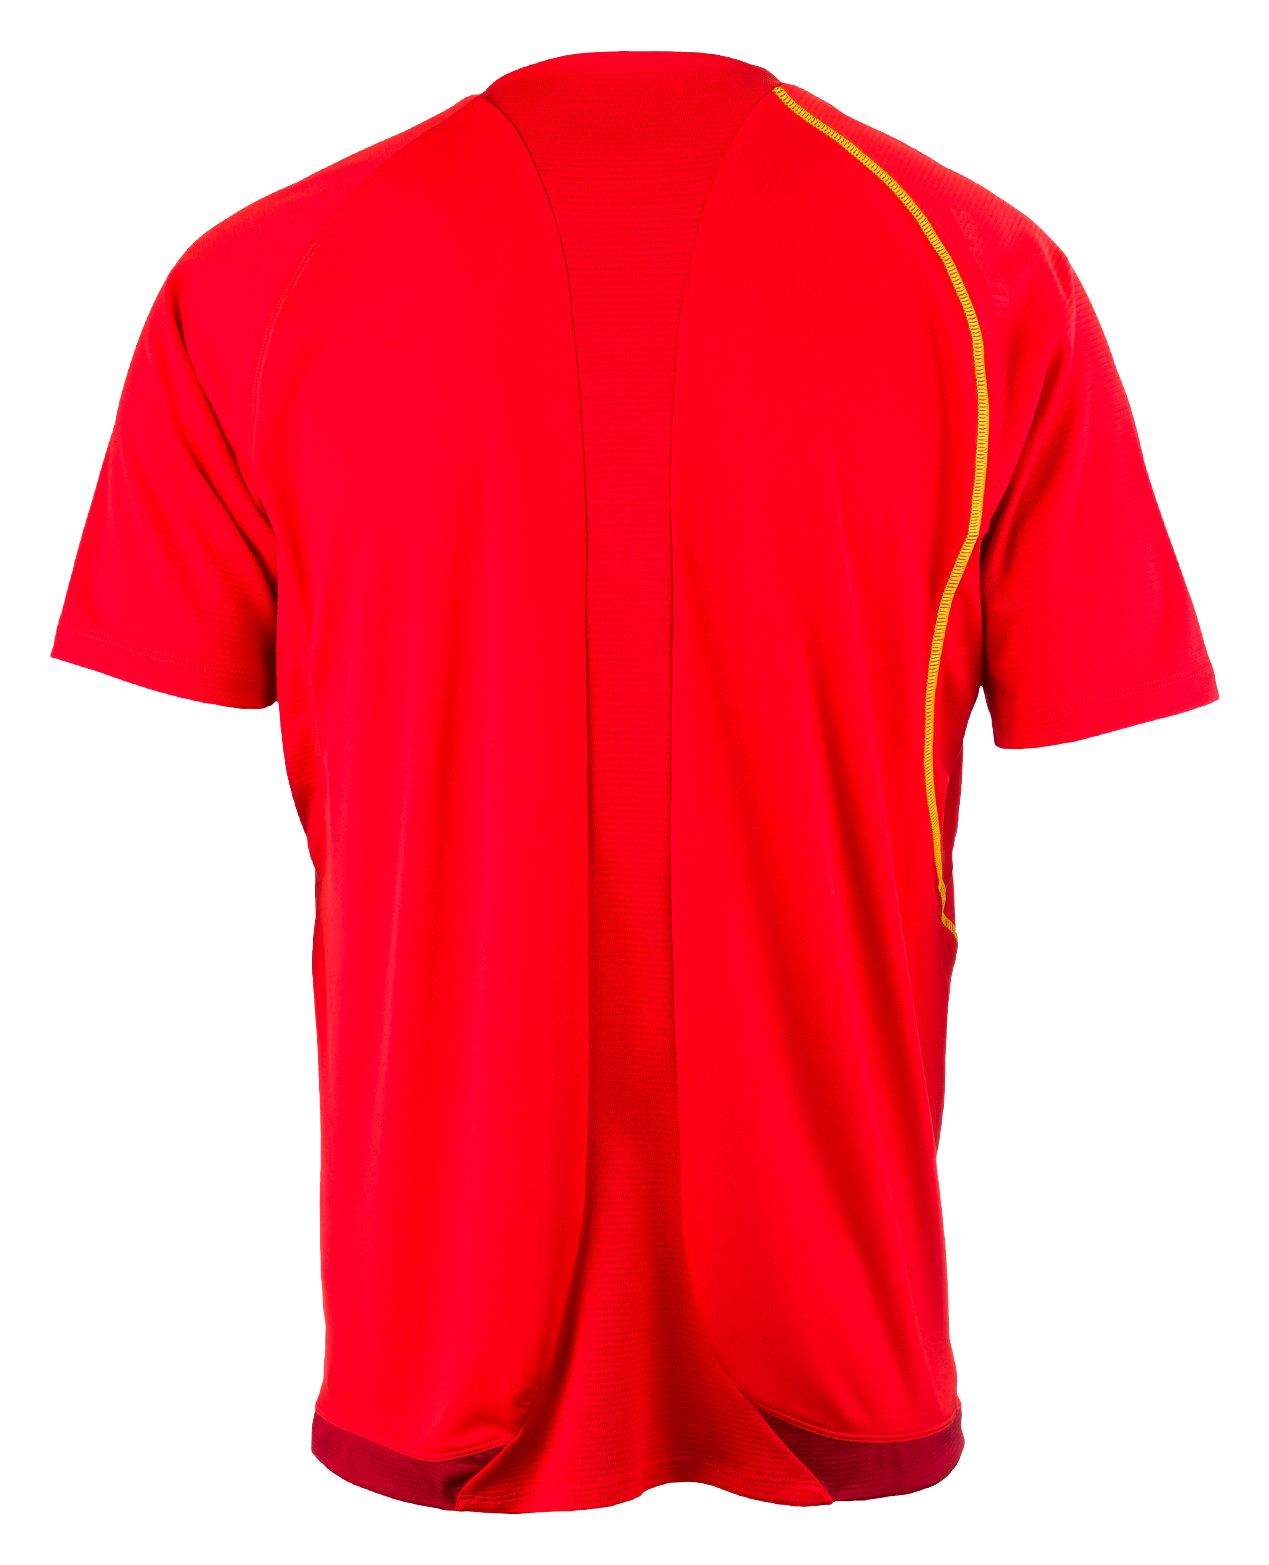 Superheat Training SS Jersey, Fiery Red image number 1